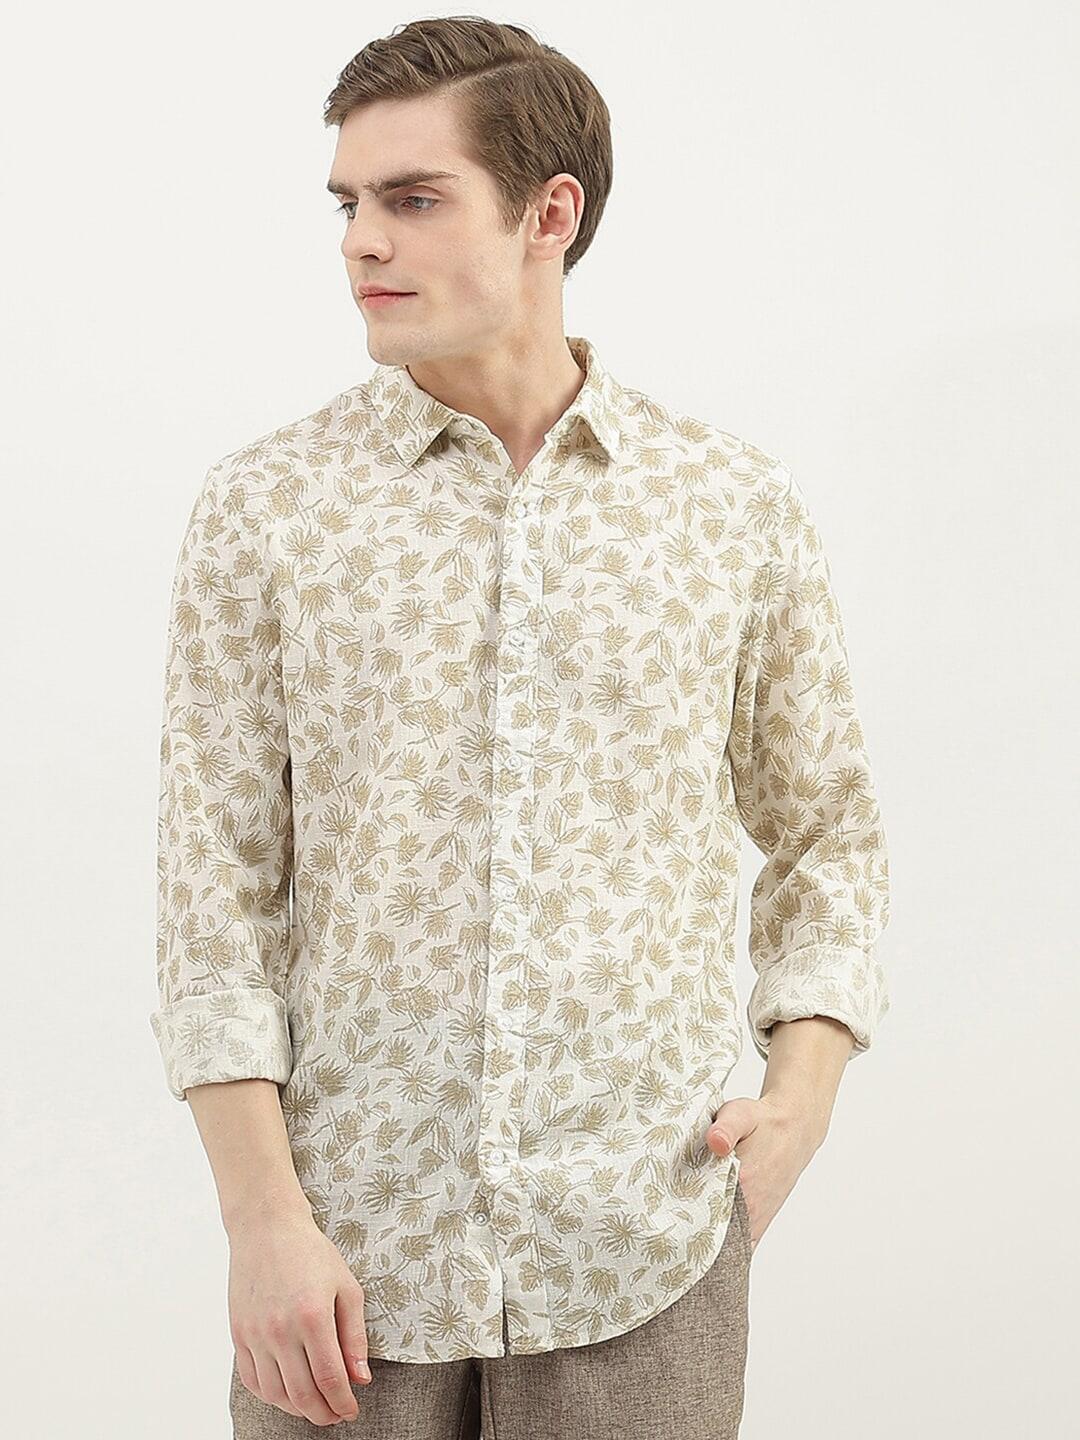 united colors of benetton men slim fit floral printed cotton casual shirt